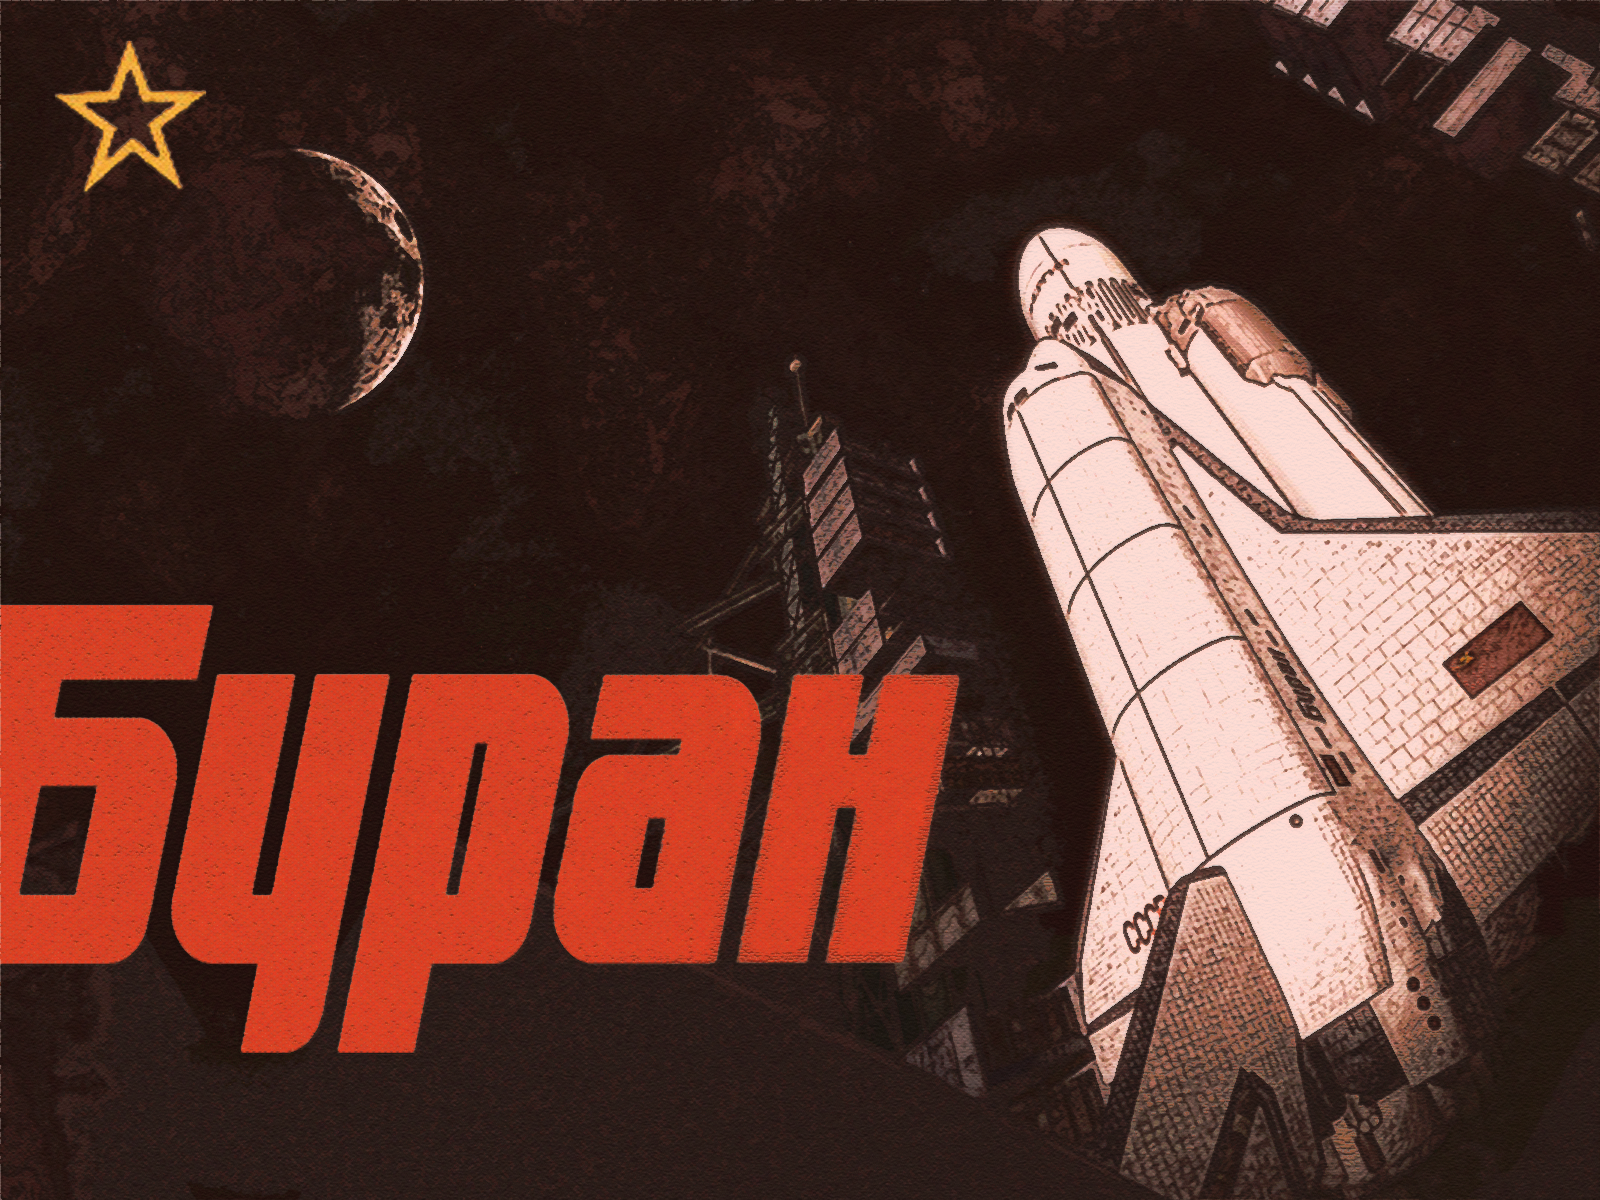 Russia's Space Shuttle Buran and other Russian Space Programs